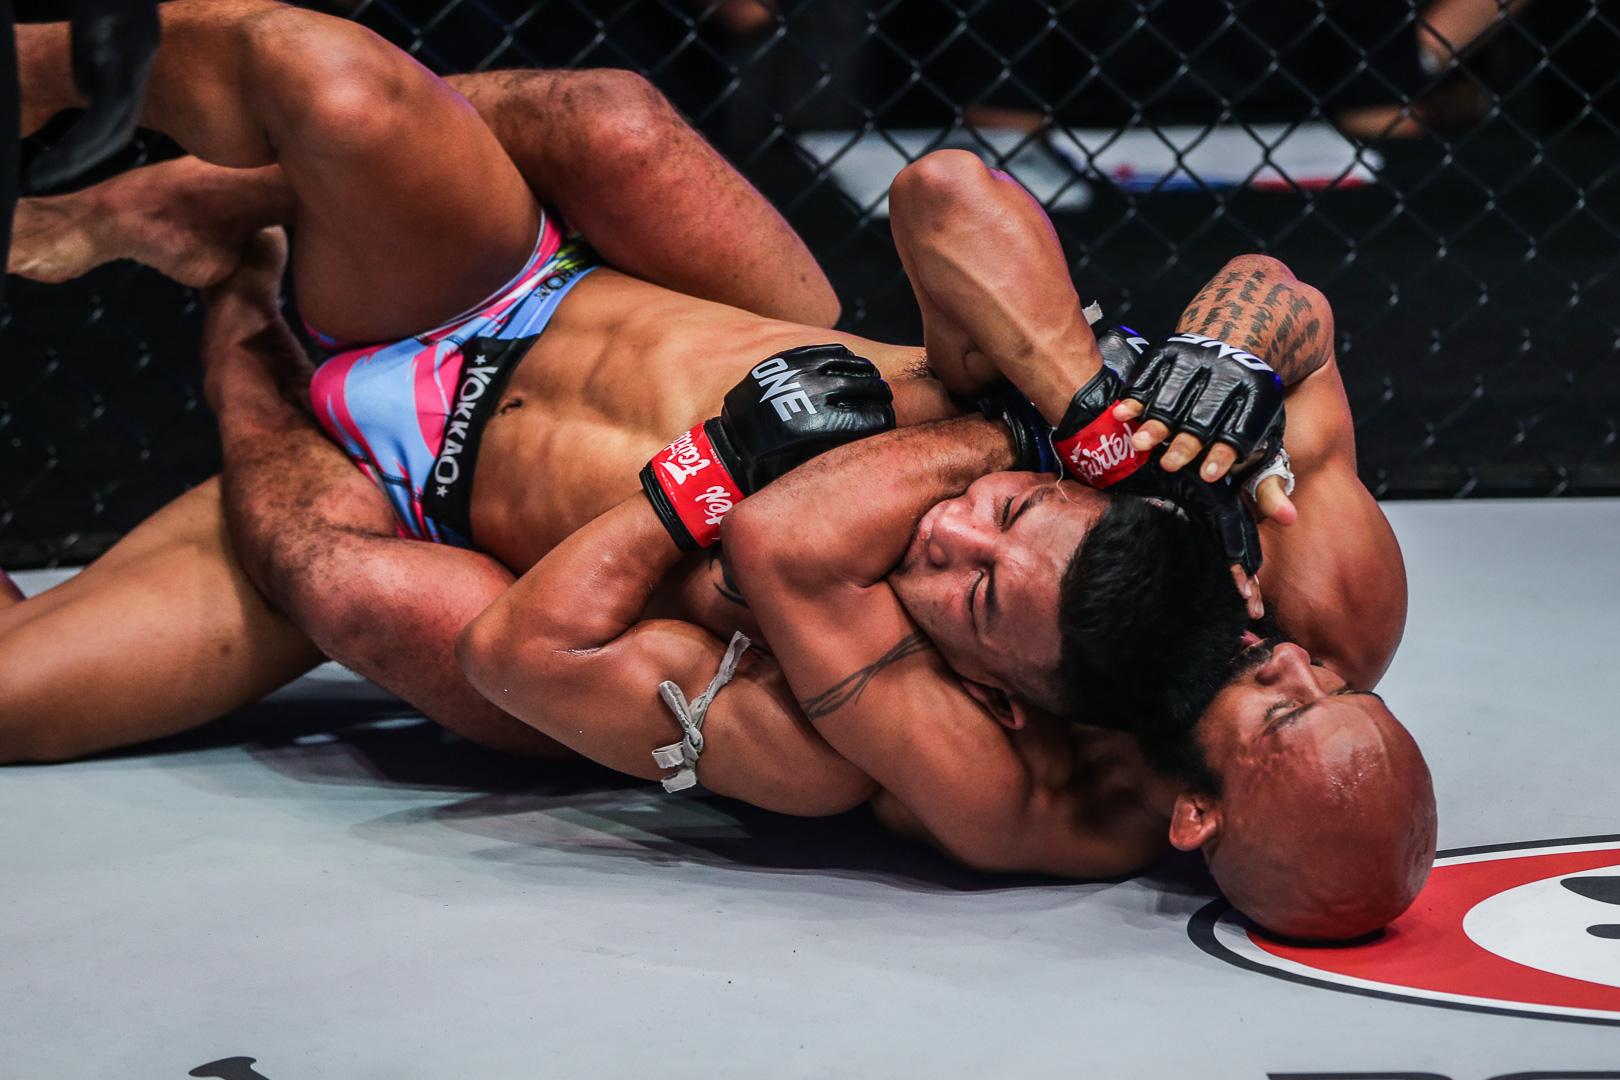 Demetrious Johnson puts Rodtang to sleep in special rules match GMA News Online